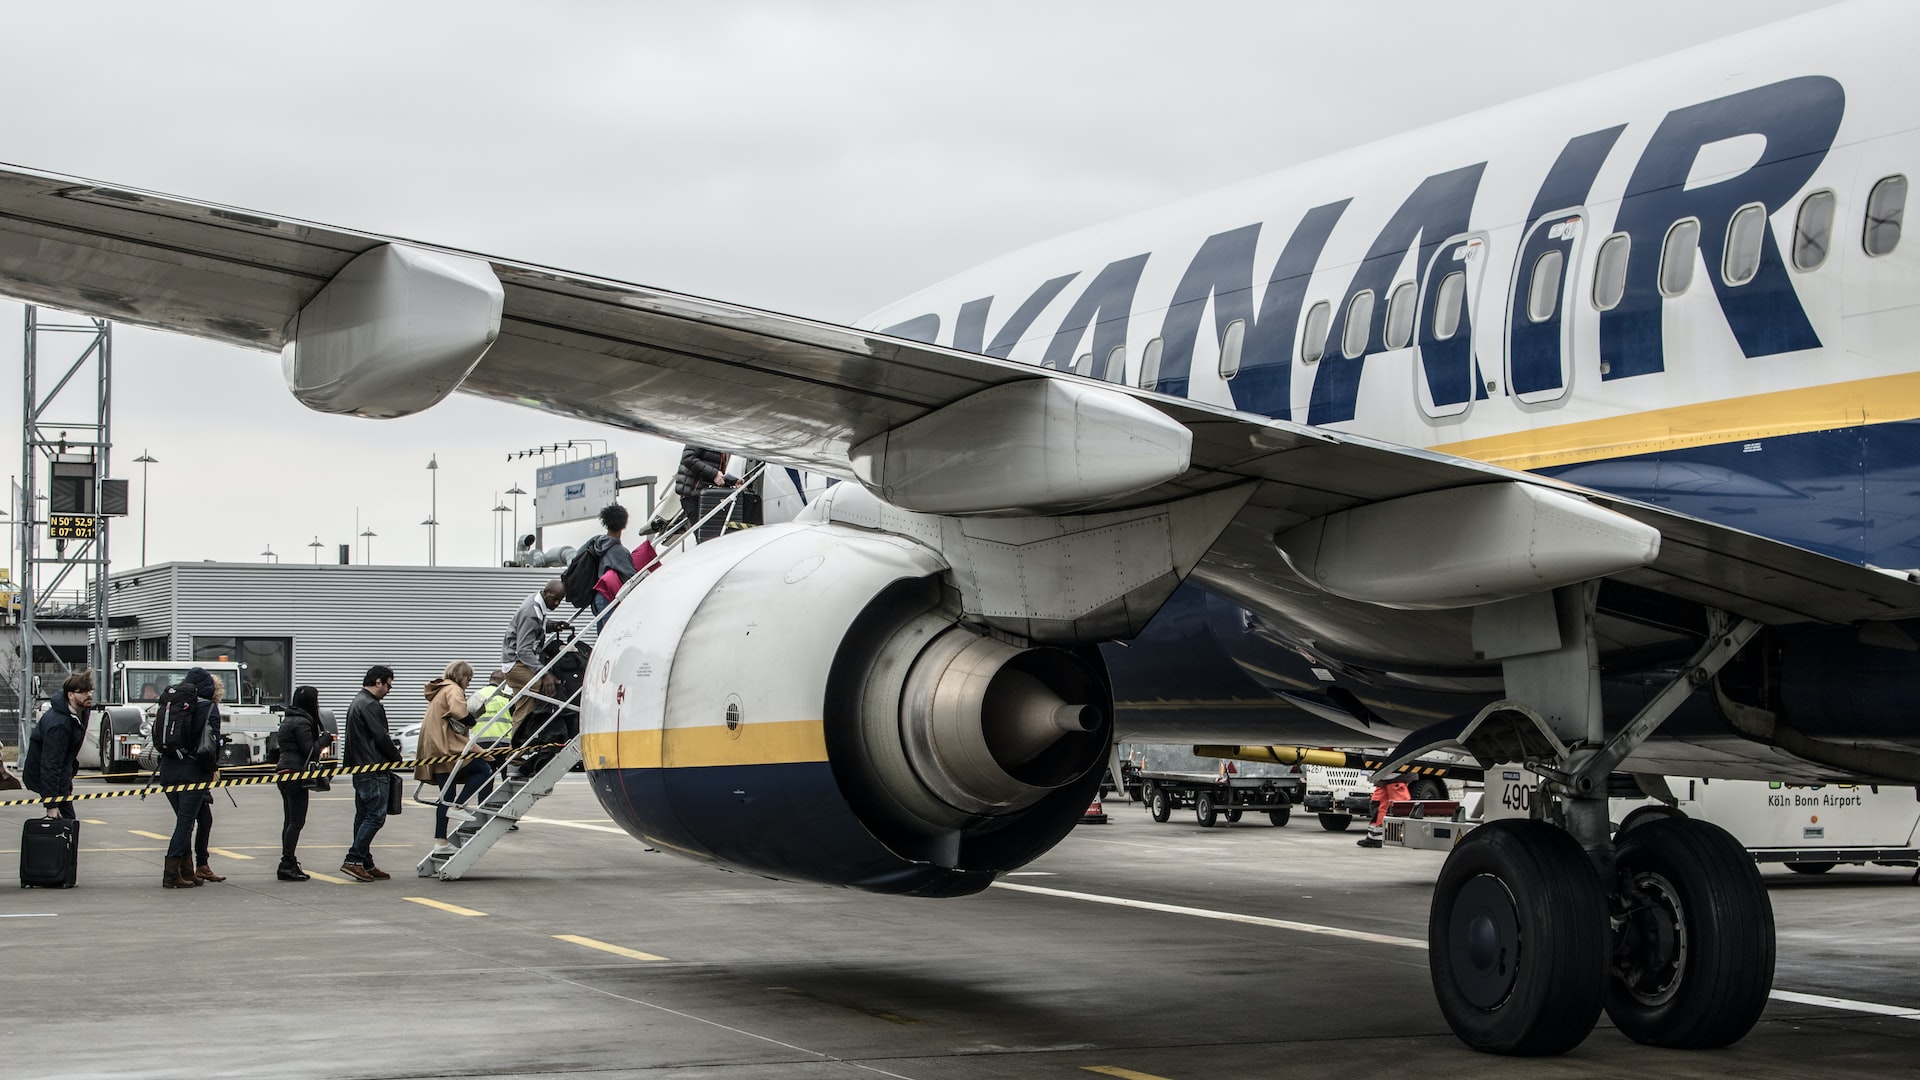 Ryanair passengers boarding the aircraft on a cloudy day.